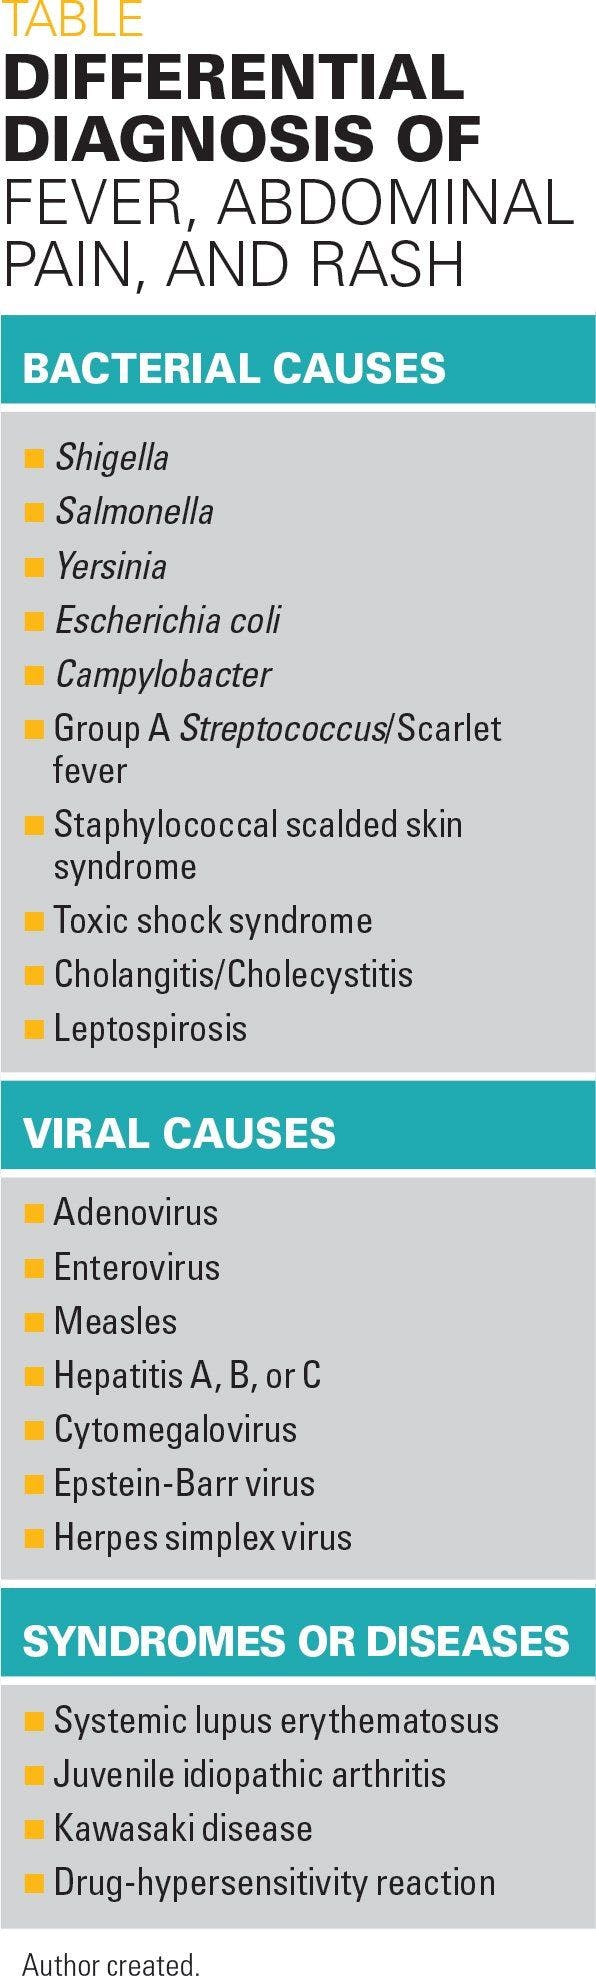 Differential diagnosis of fever, abdominal pain, and rash